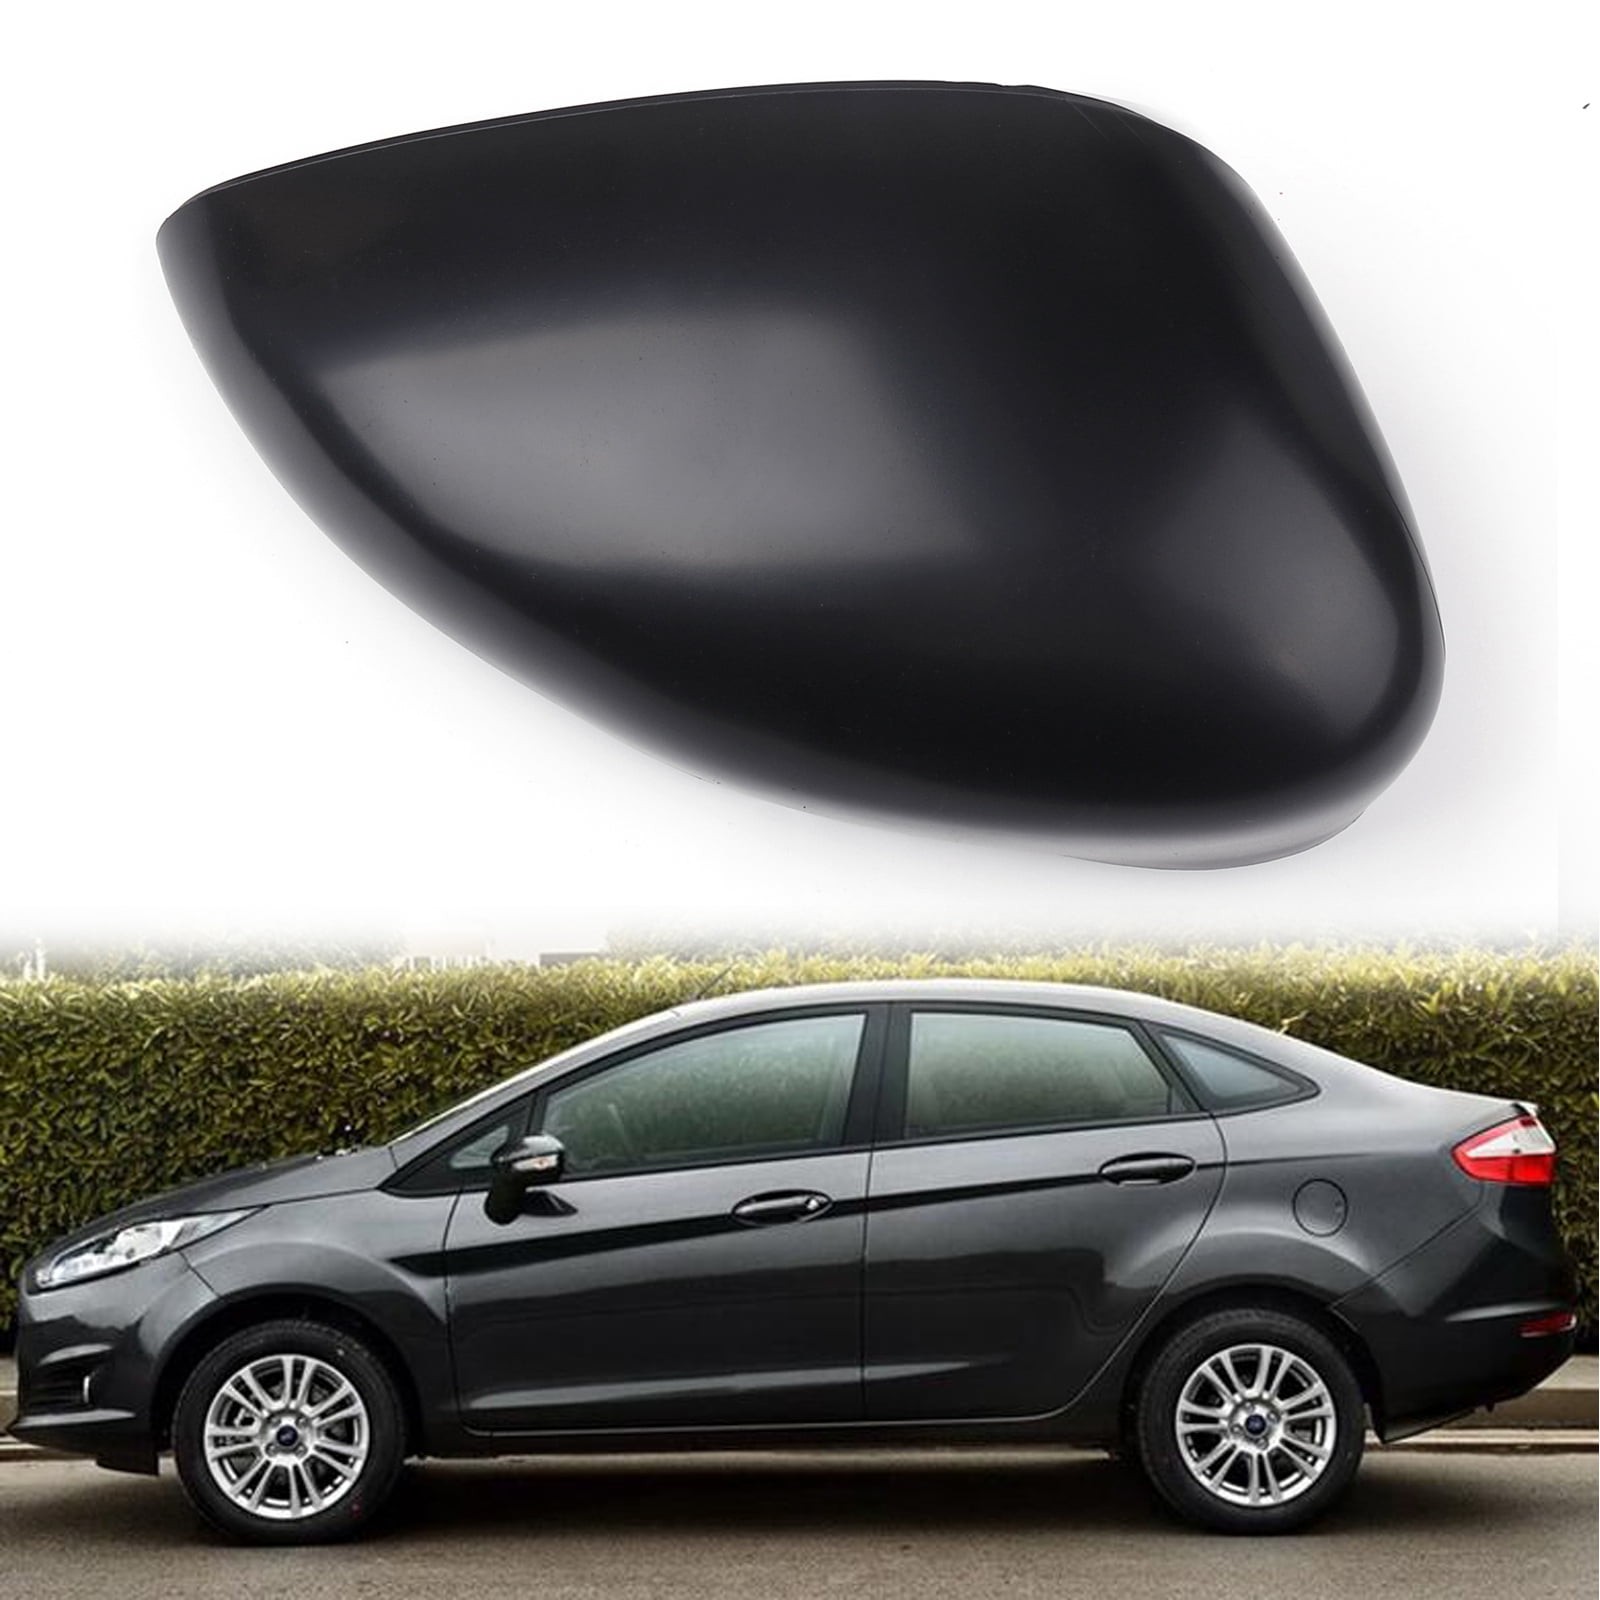 CMR Right Matte Black Wing Door Side Rearview Mirror Cover Per ford Fiesta 09-15 Q 